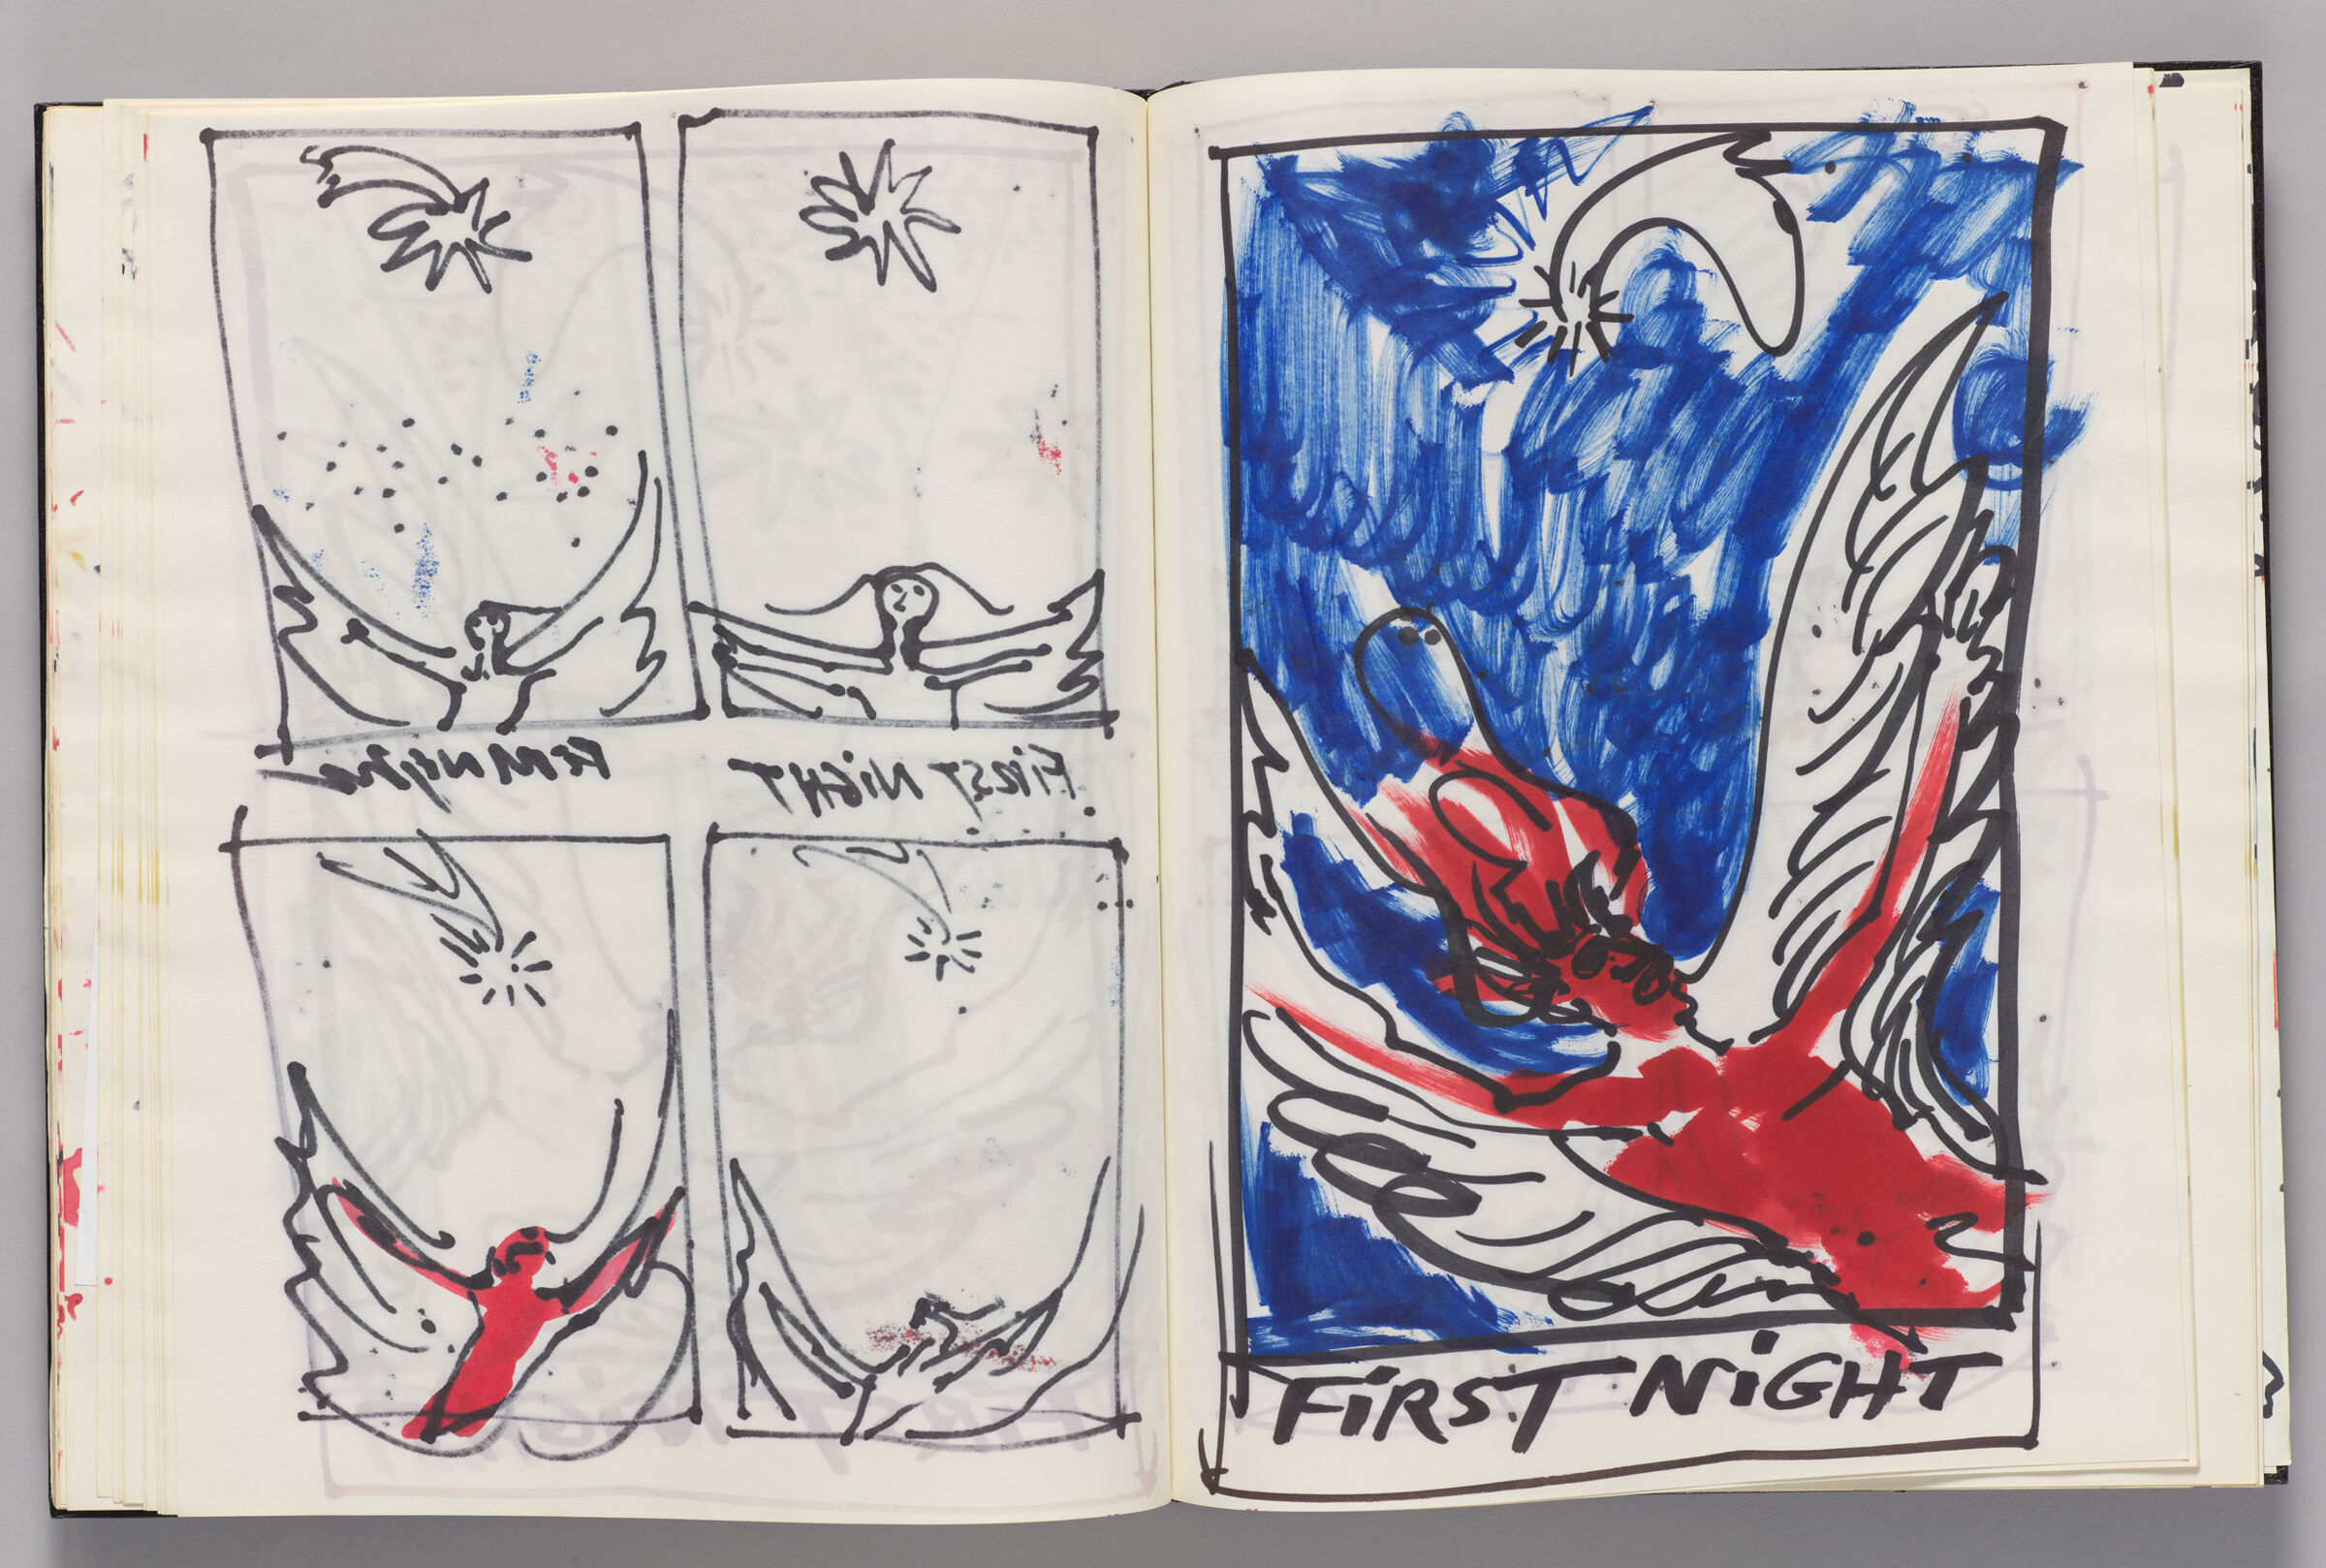 Untitled (Bleed-Through Of Previous Page, Left Page); Untitled (Full-Page Design For First Night Poster, Right Page)